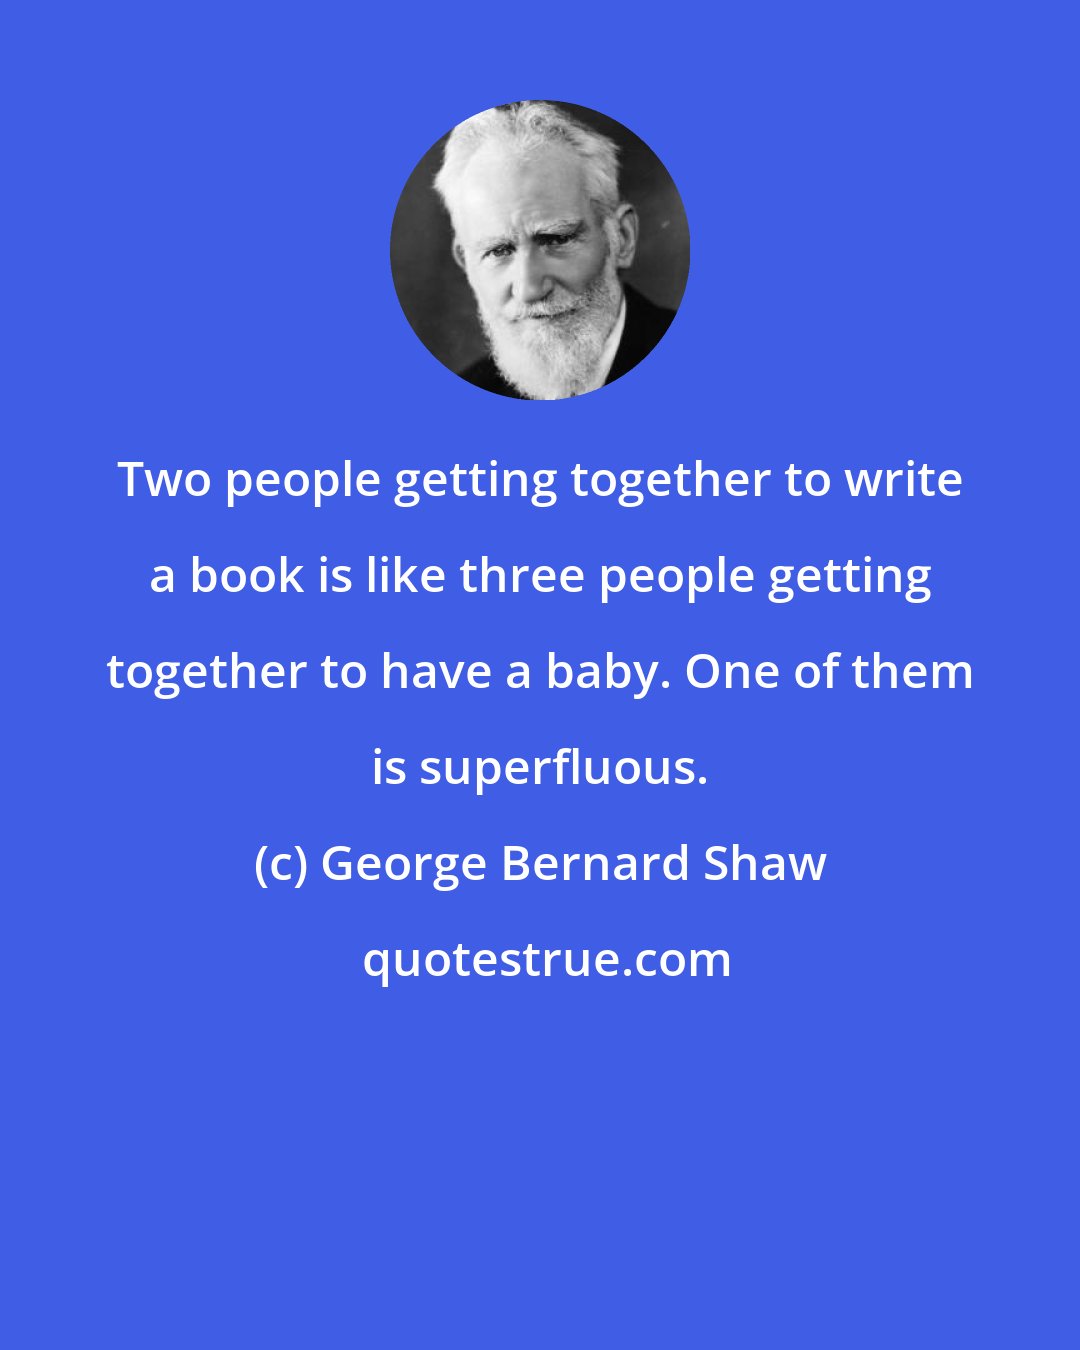 George Bernard Shaw: Two people getting together to write a book is like three people getting together to have a baby. One of them is superfluous.